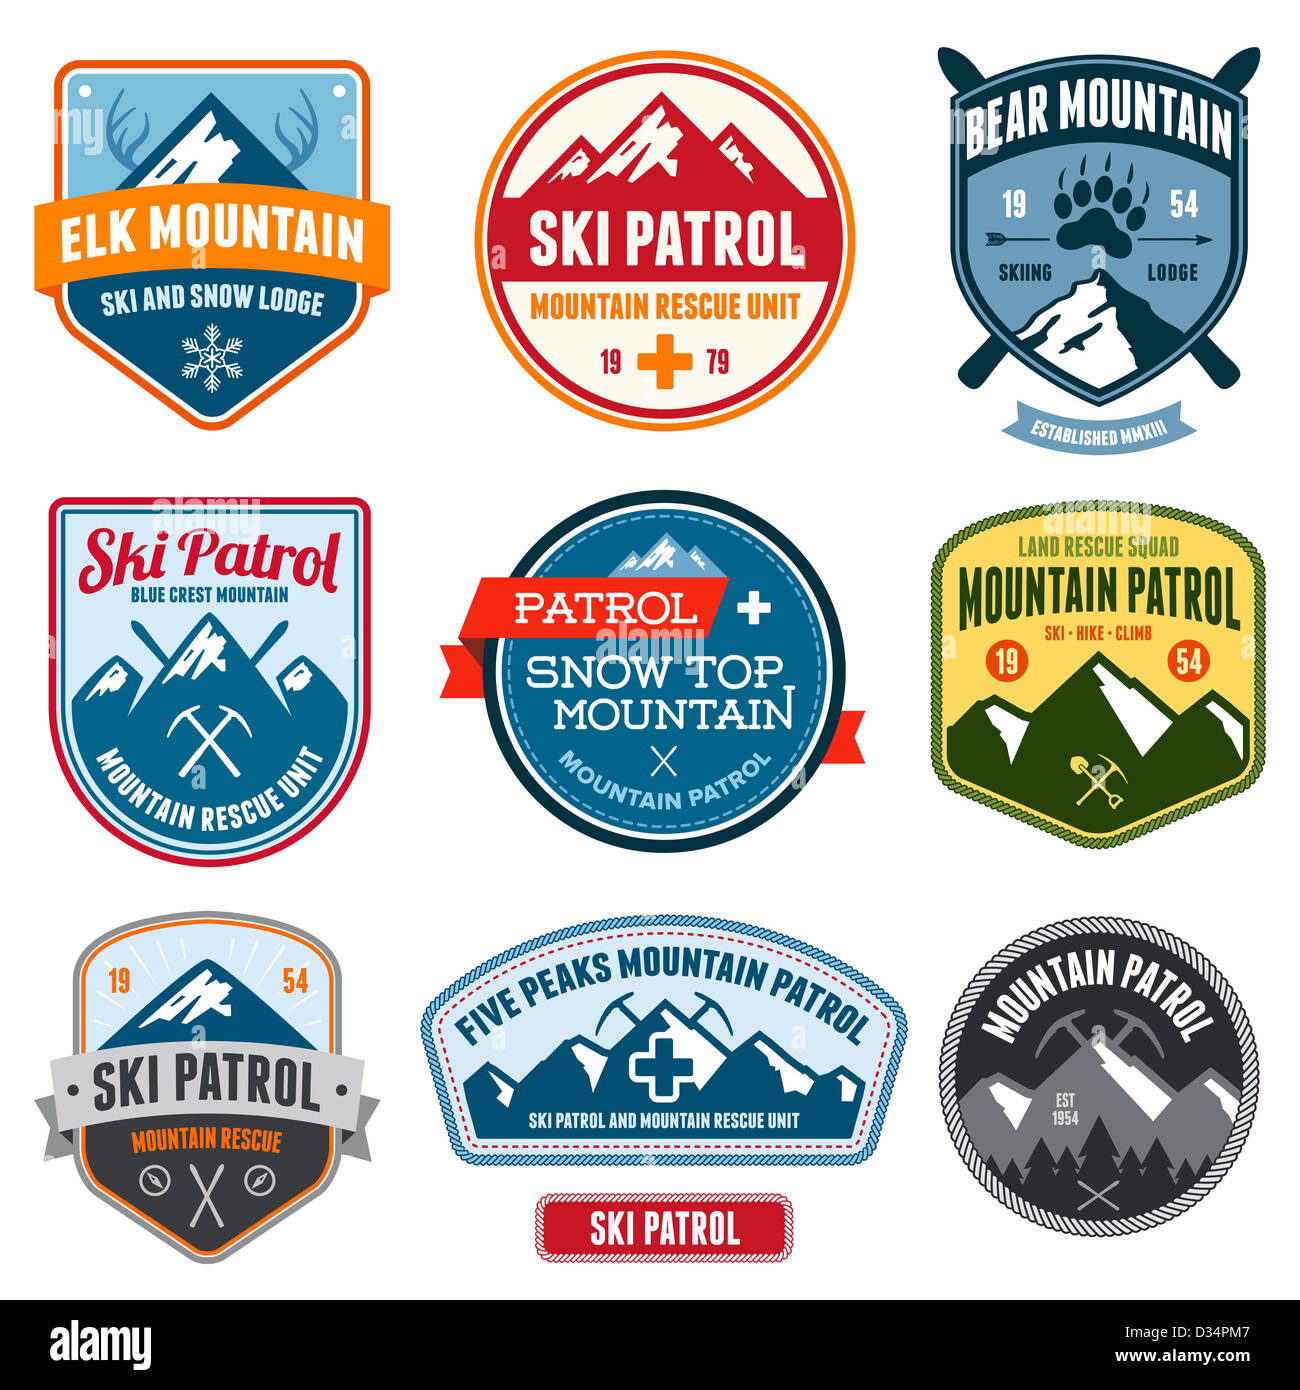 Set of ski patrol mountain badges and patches Stock Photo